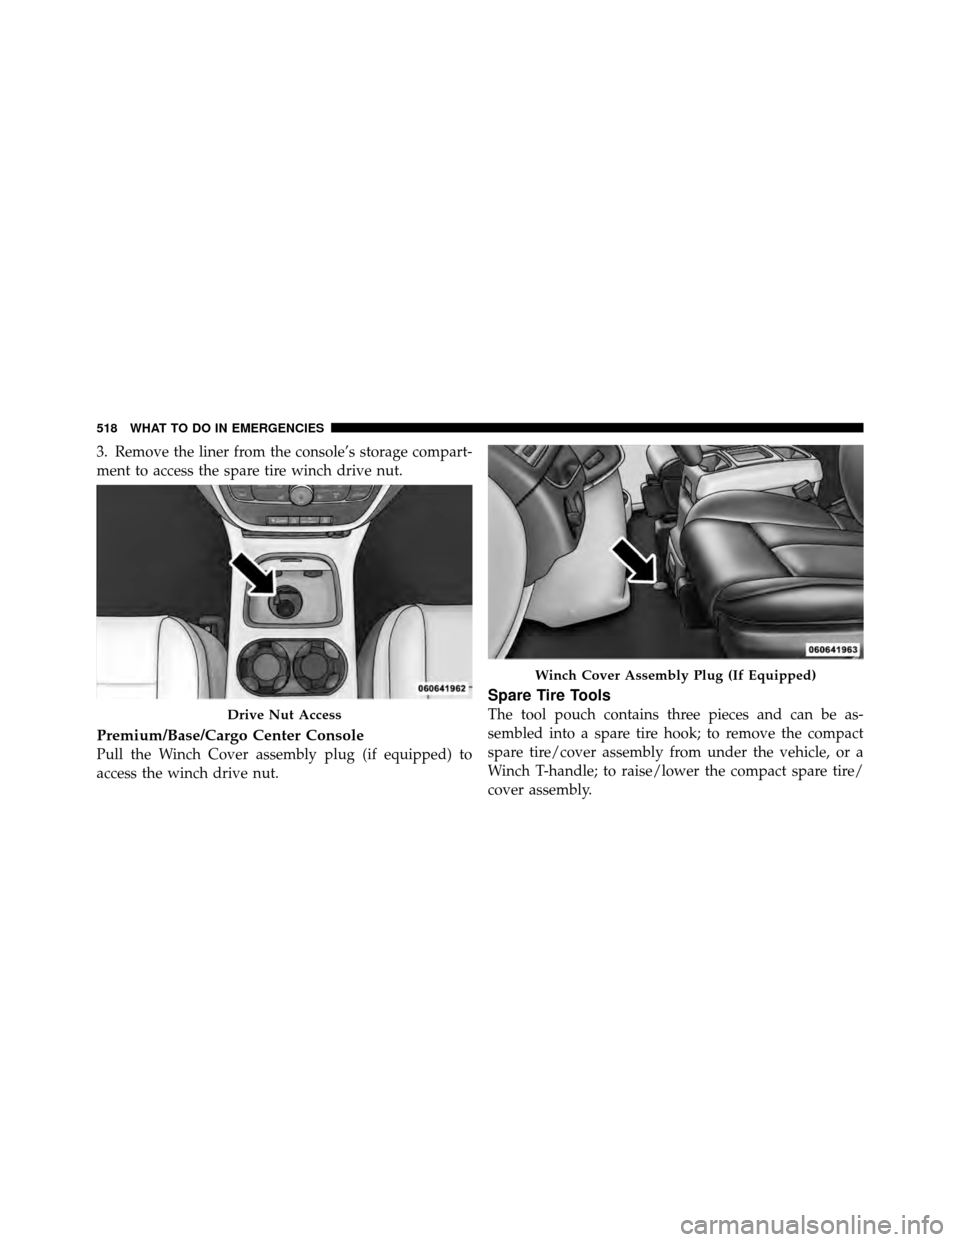 Ram Cargo Van 2012  Owners Manual 3. Remove the liner from the console’s storage compart-
ment to access the spare tire winch drive nut.
Premium/Base/Cargo Center Console
Pull the Winch Cover assembly plug (if equipped) to
access th